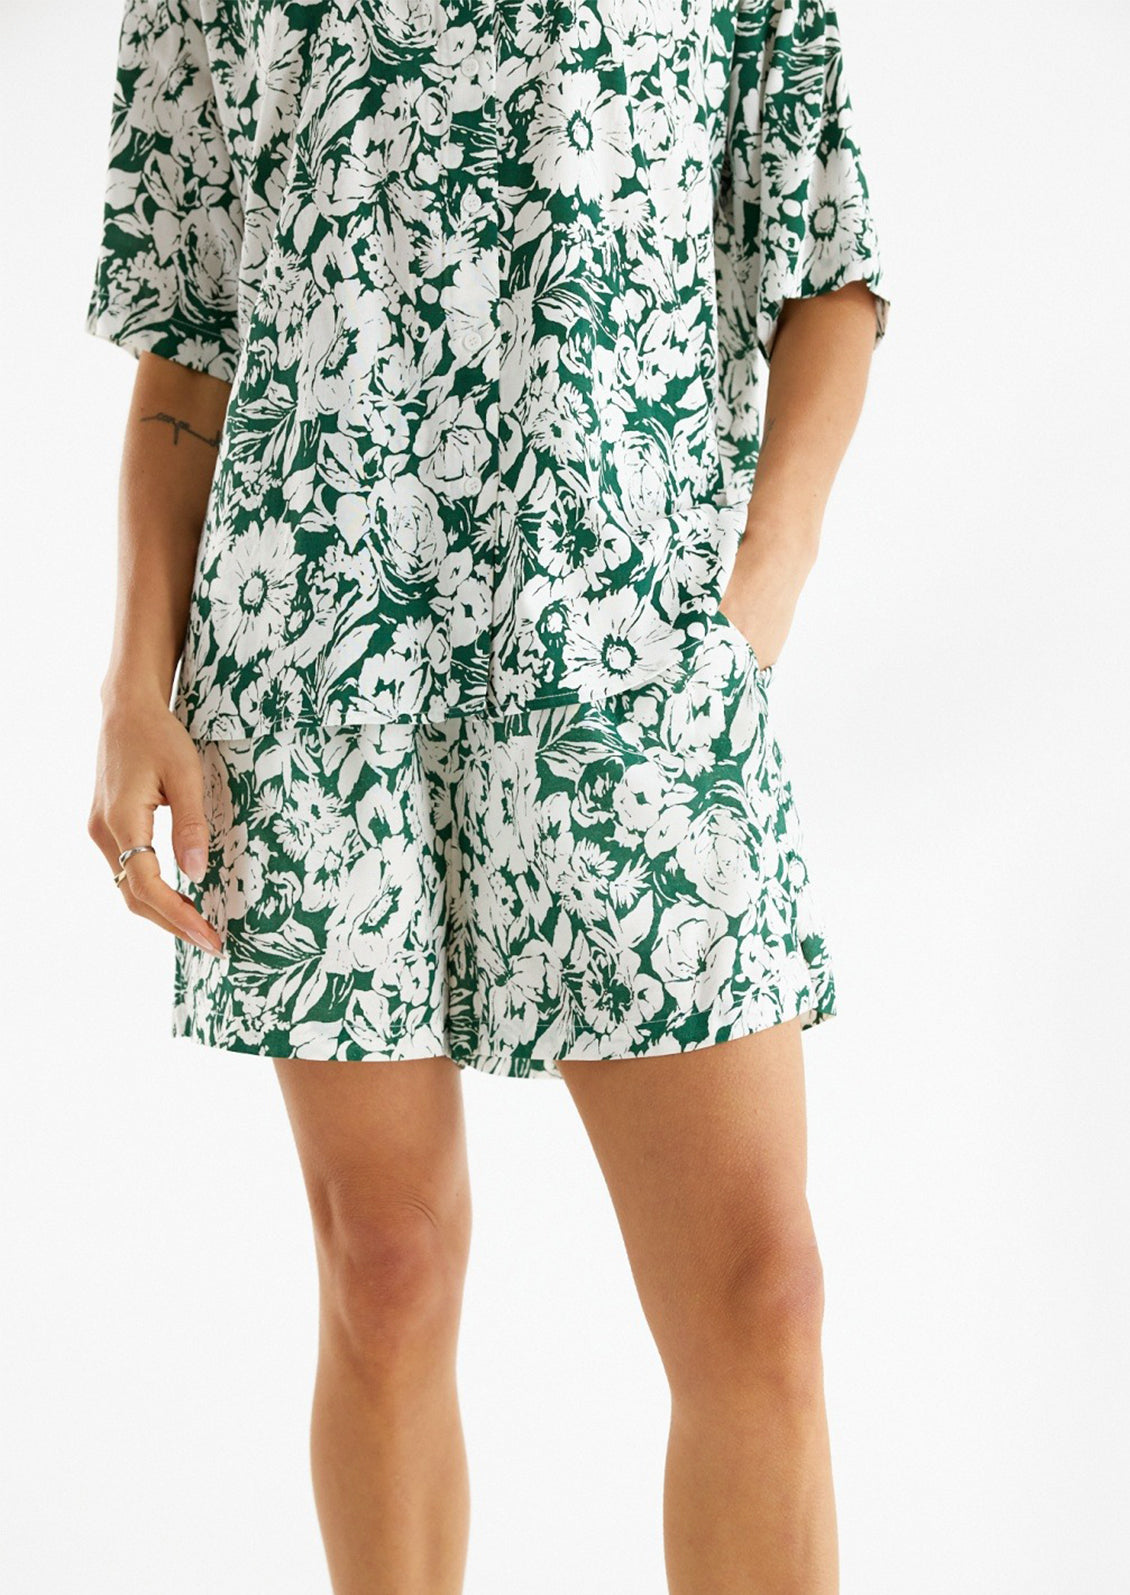 Woman wearing green and white floral printed shorts. 